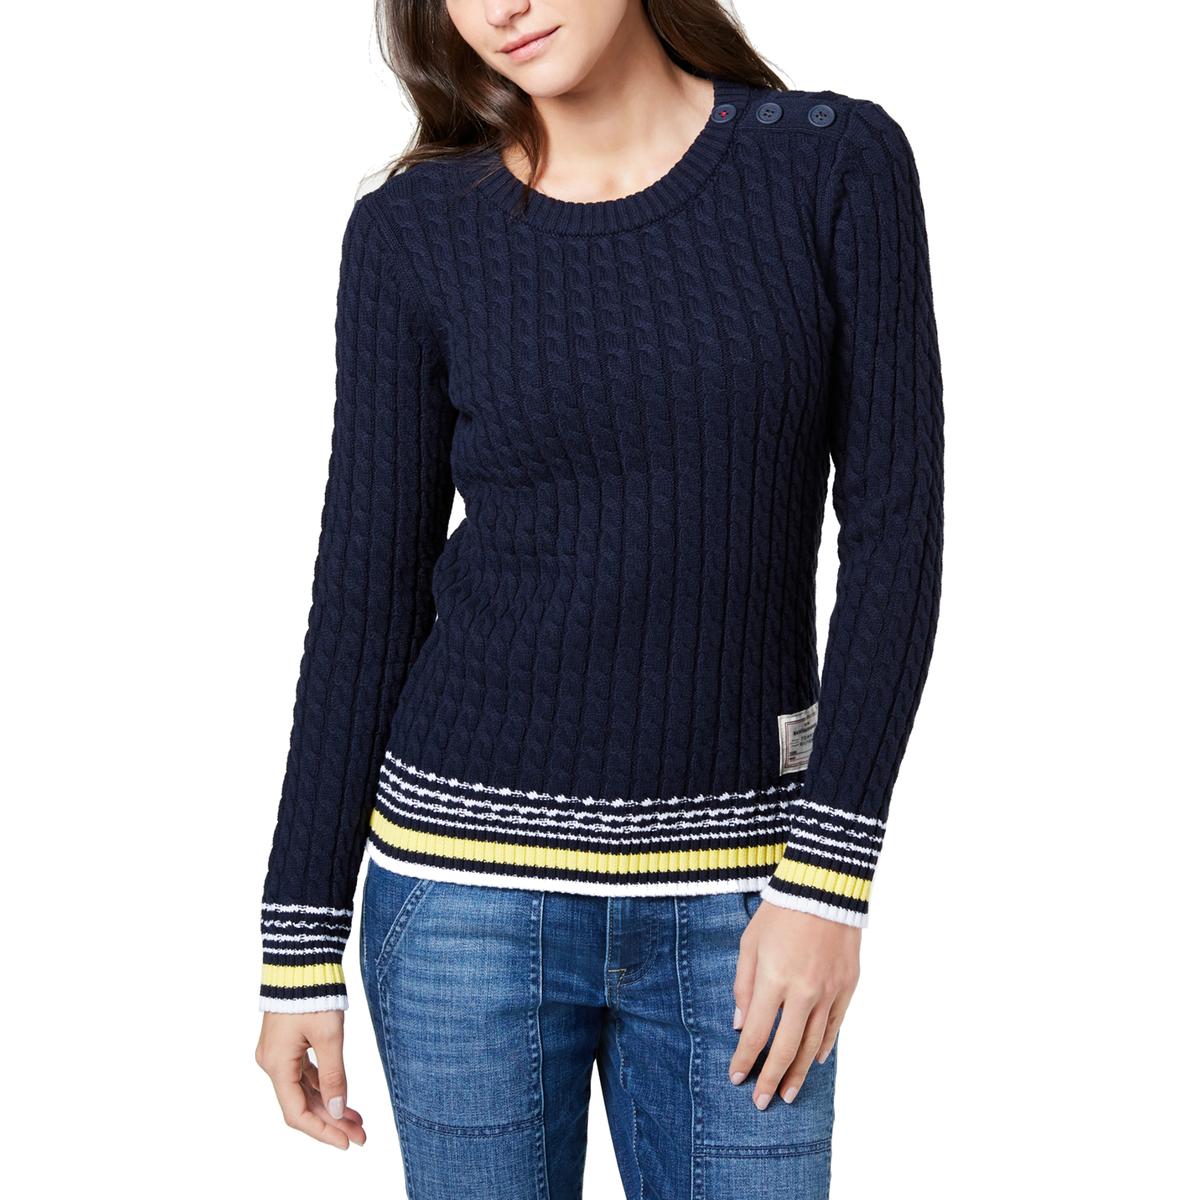 Tommy Hilfiger Womens Navy Cable Knit Striped Crewneck Sweater XL BHFO ...